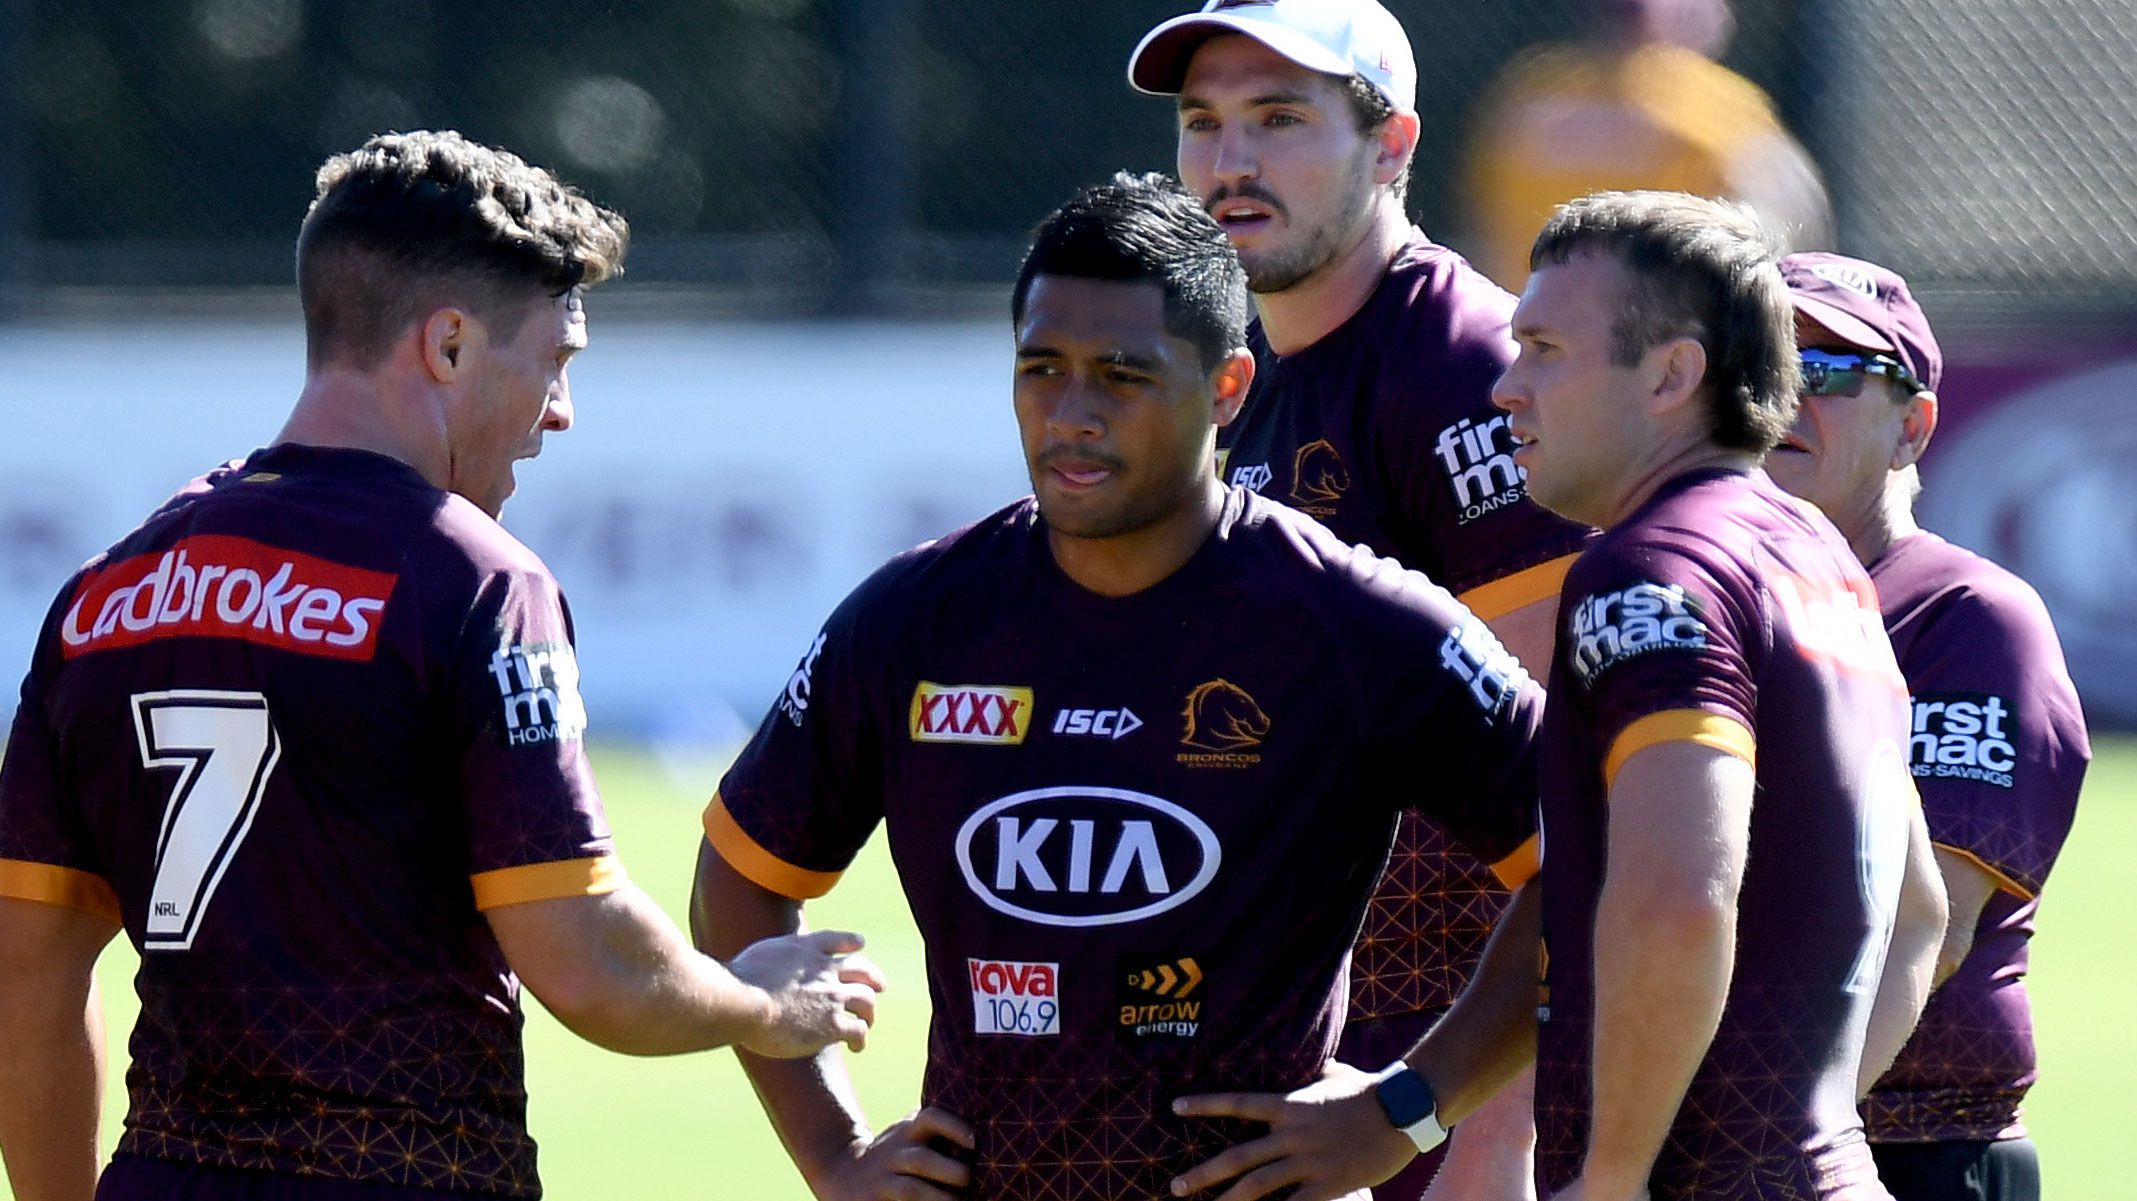 Broncos halves Brodie Croft and Anthony Milford locked in discussion with hooker Jake Turpin.